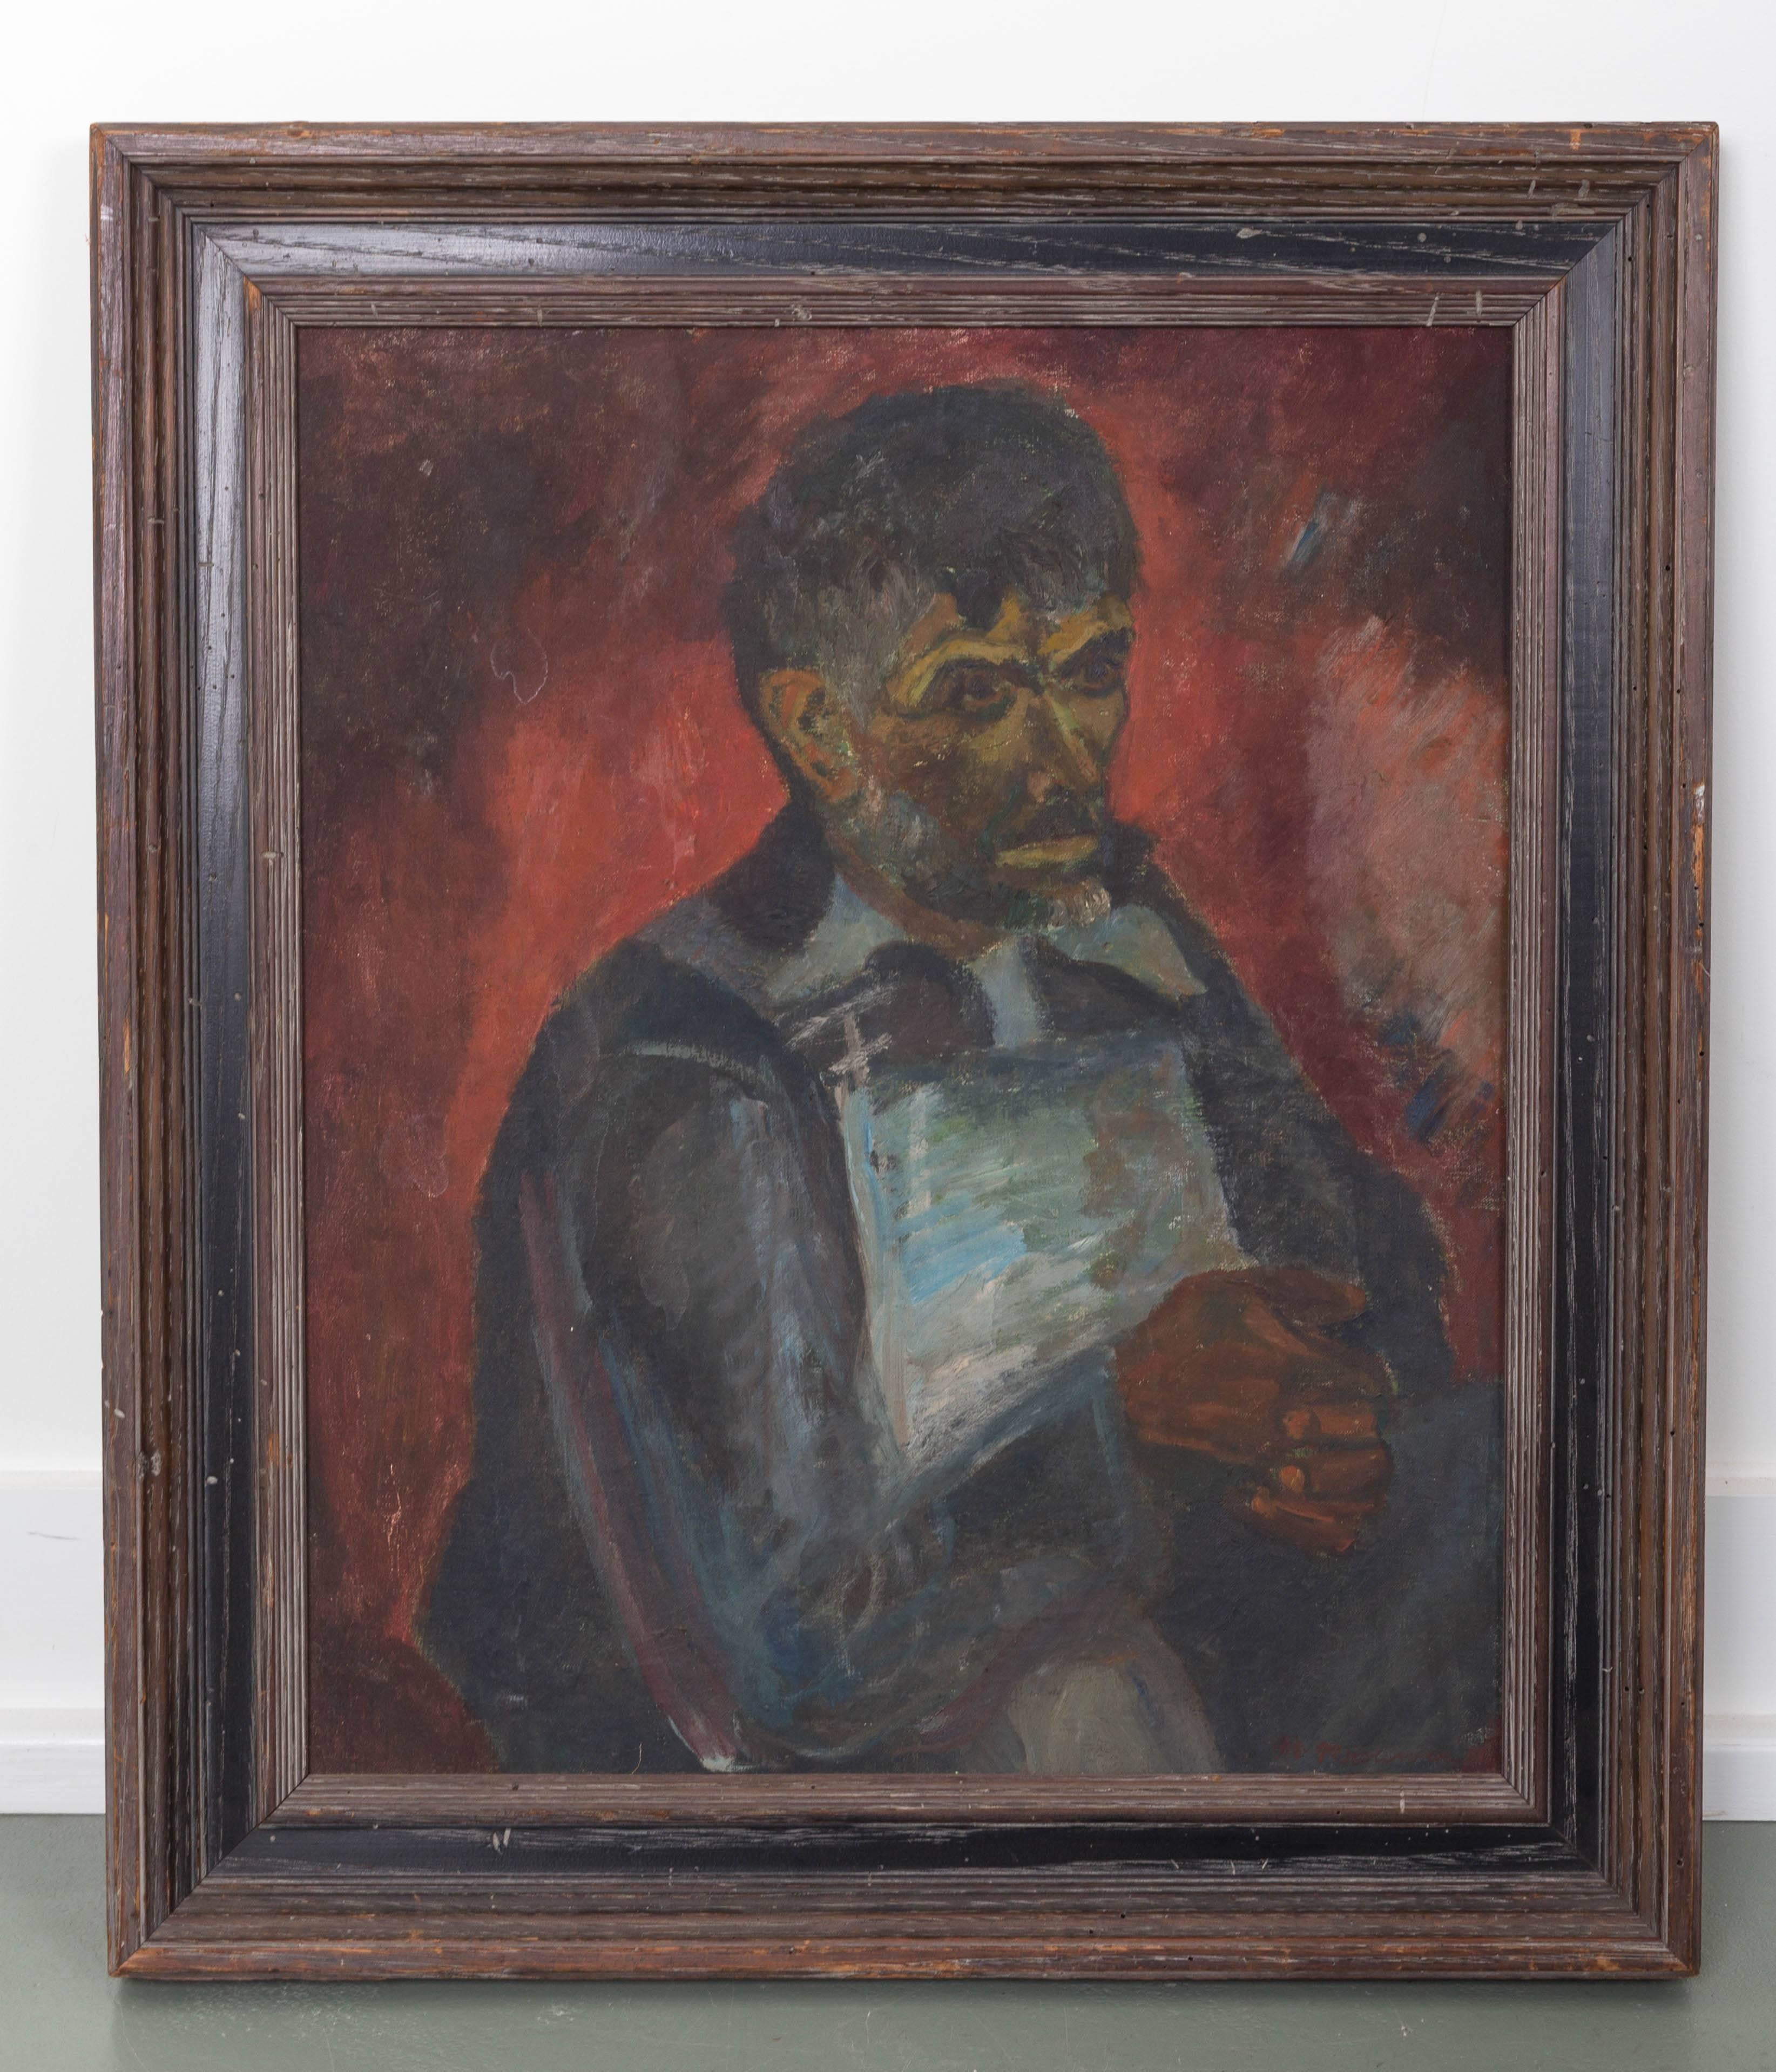 Portrait of beaded man, isigned 1937.  Dark red background oil on canvas. Nicely framed.